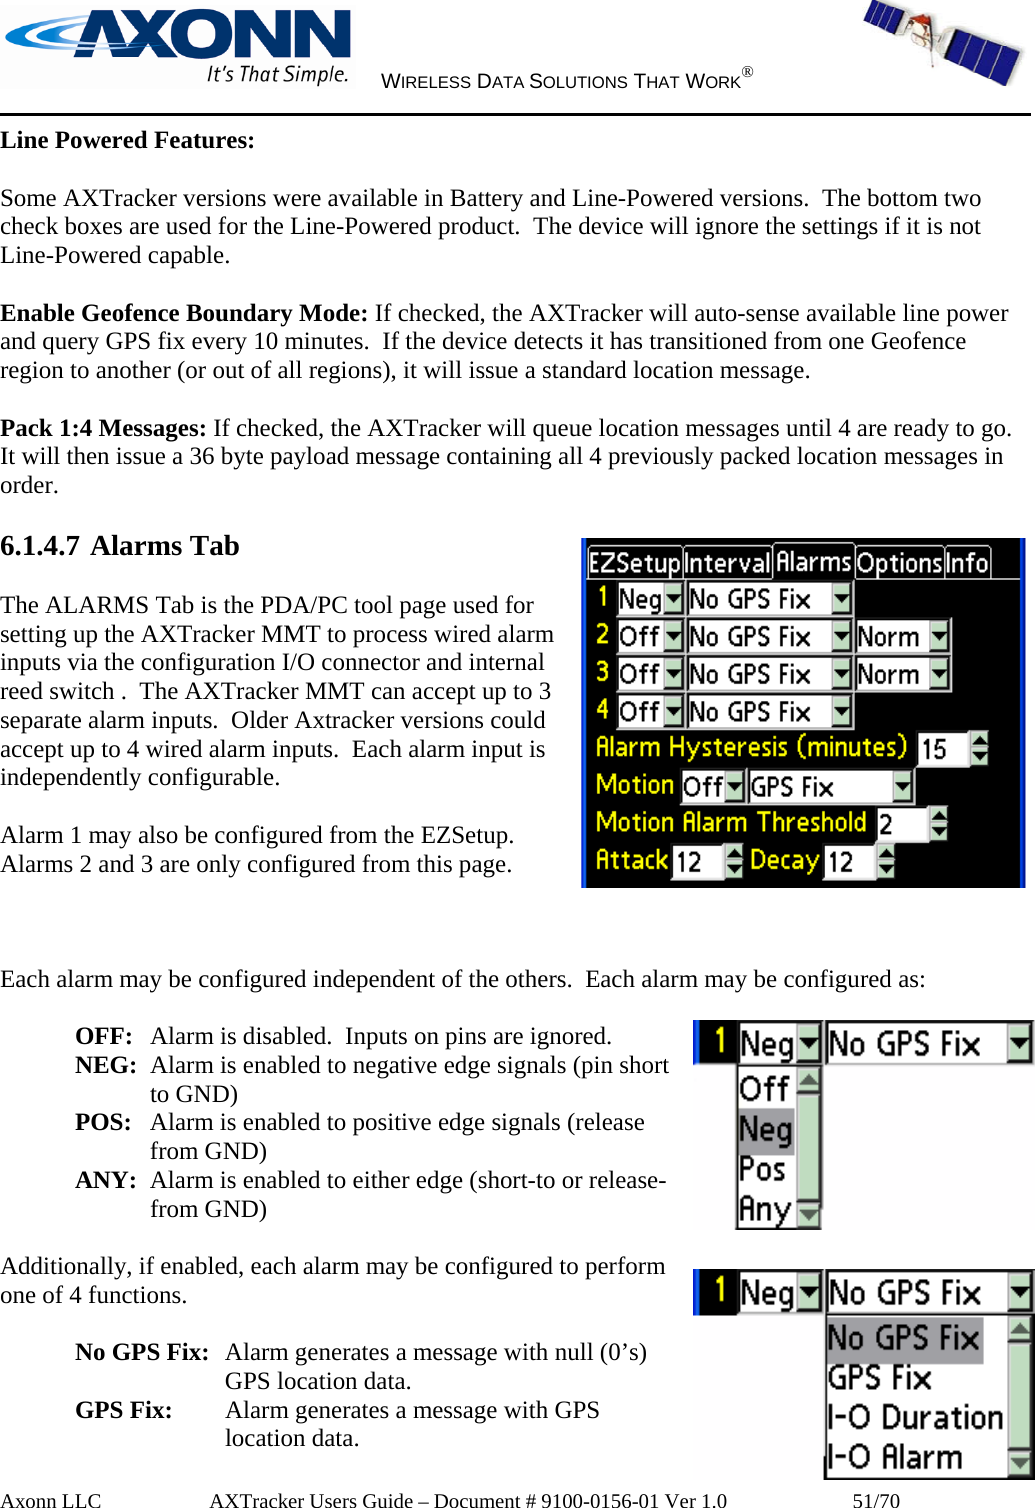     WIRELESS DATA SOLUTIONS THAT WORK®   Axonn LLC         AXTracker Users Guide – Document # 9100-0156-01 Ver 1.0                  51/70 Line Powered Features:  Some AXTracker versions were available in Battery and Line-Powered versions.  The bottom two check boxes are used for the Line-Powered product.  The device will ignore the settings if it is not Line-Powered capable.  Enable Geofence Boundary Mode: If checked, the AXTracker will auto-sense available line power and query GPS fix every 10 minutes.  If the device detects it has transitioned from one Geofence region to another (or out of all regions), it will issue a standard location message.  Pack 1:4 Messages: If checked, the AXTracker will queue location messages until 4 are ready to go.  It will then issue a 36 byte payload message containing all 4 previously packed location messages in order.  6.1.4.7 Alarms Tab  The ALARMS Tab is the PDA/PC tool page used for setting up the AXTracker MMT to process wired alarm inputs via the configuration I/O connector and internal reed switch .  The AXTracker MMT can accept up to 3 separate alarm inputs.  Older Axtracker versions could accept up to 4 wired alarm inputs.  Each alarm input is independently configurable.  Alarm 1 may also be configured from the EZSetup. Alarms 2 and 3 are only configured from this page.    Each alarm may be configured independent of the others.  Each alarm may be configured as:  OFF:   Alarm is disabled.  Inputs on pins are ignored.  NEG:  Alarm is enabled to negative edge signals (pin short to GND) POS:   Alarm is enabled to positive edge signals (release from GND) ANY:  Alarm is enabled to either edge (short-to or release-from GND)  Additionally, if enabled, each alarm may be configured to perform one of 4 functions.  No GPS Fix:  Alarm generates a message with null (0’s) GPS location data. GPS Fix:   Alarm generates a message with GPS location data. 